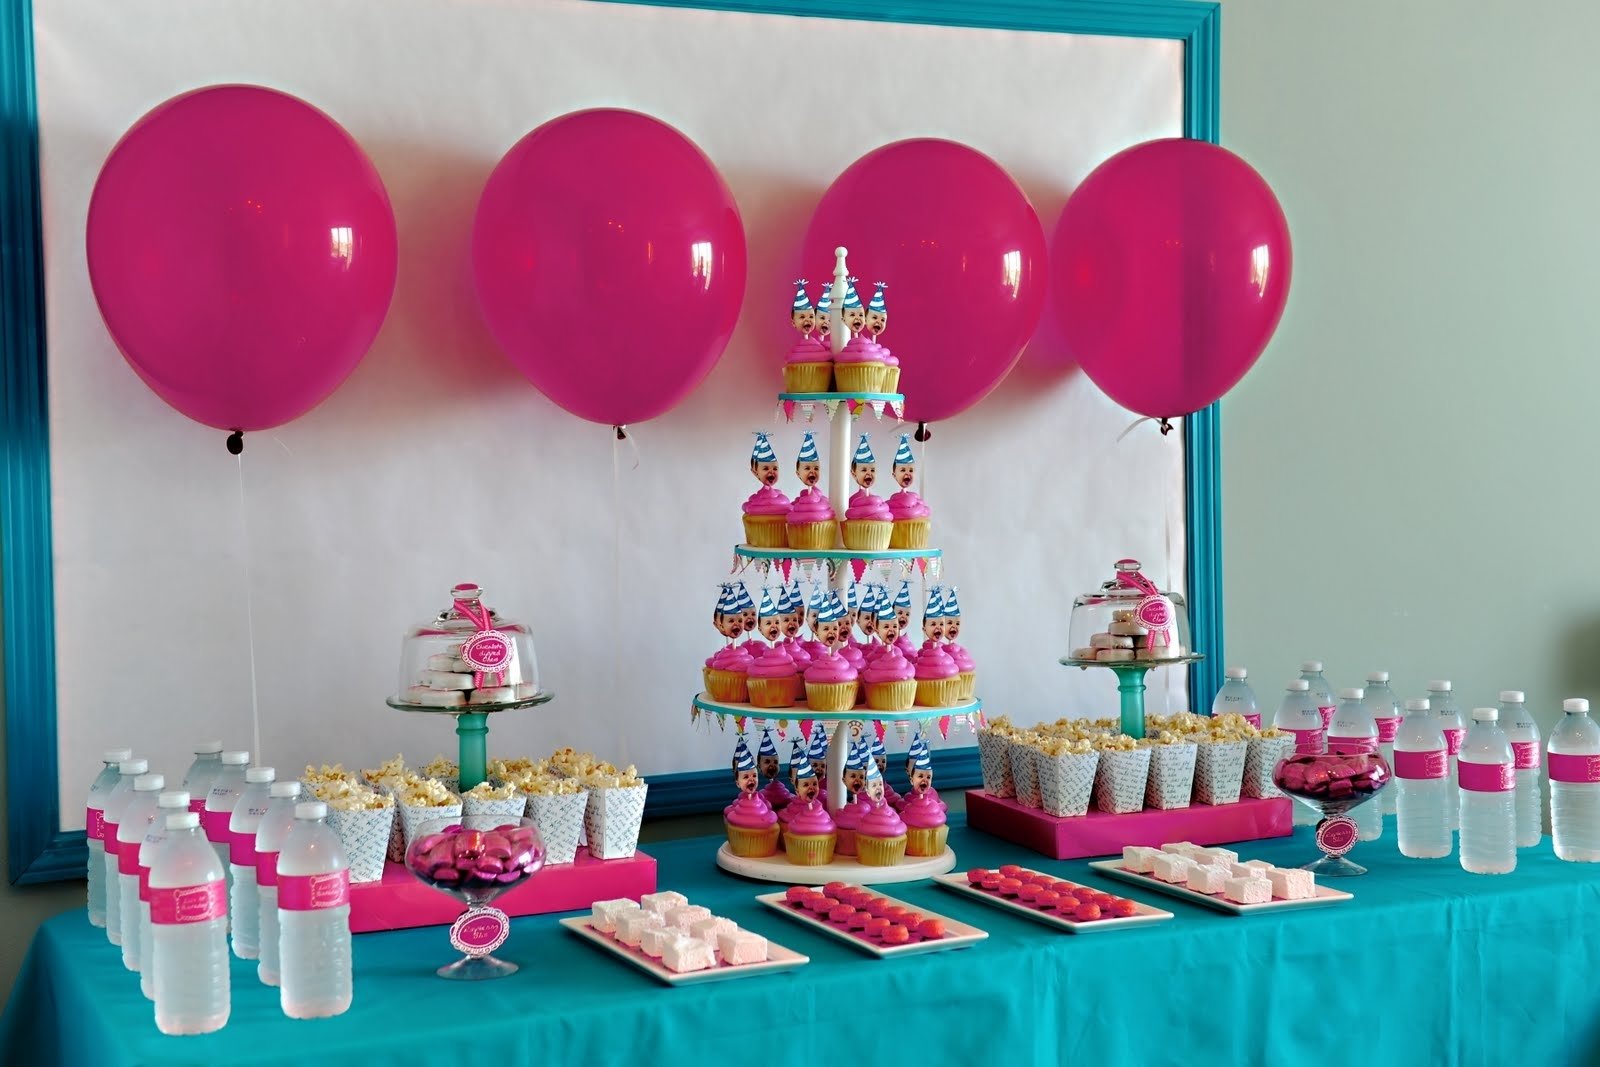 10 Awesome Two Year Old Birthday Ideas themes birthday 2 year old birthday party ideas houston together 5 2022